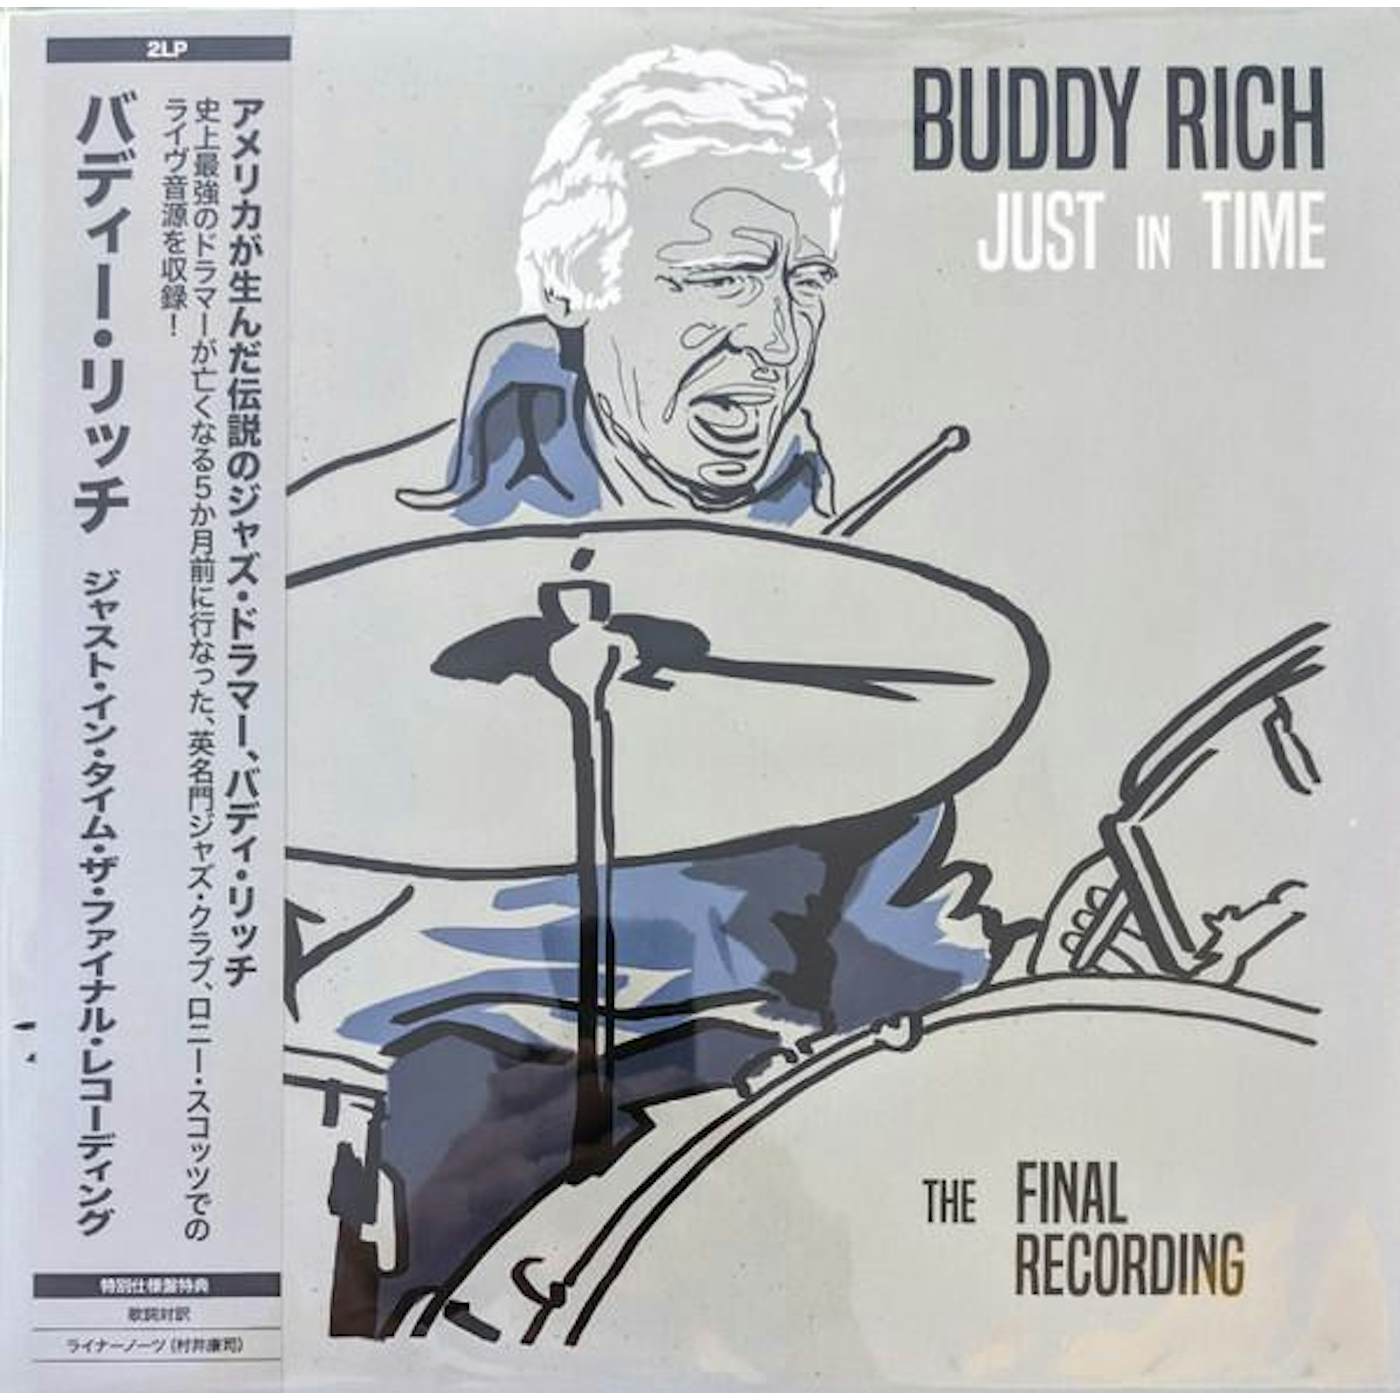 Buddy Rich JUST IN TIME - THE FINAL RECORDING (I) Vinyl Record